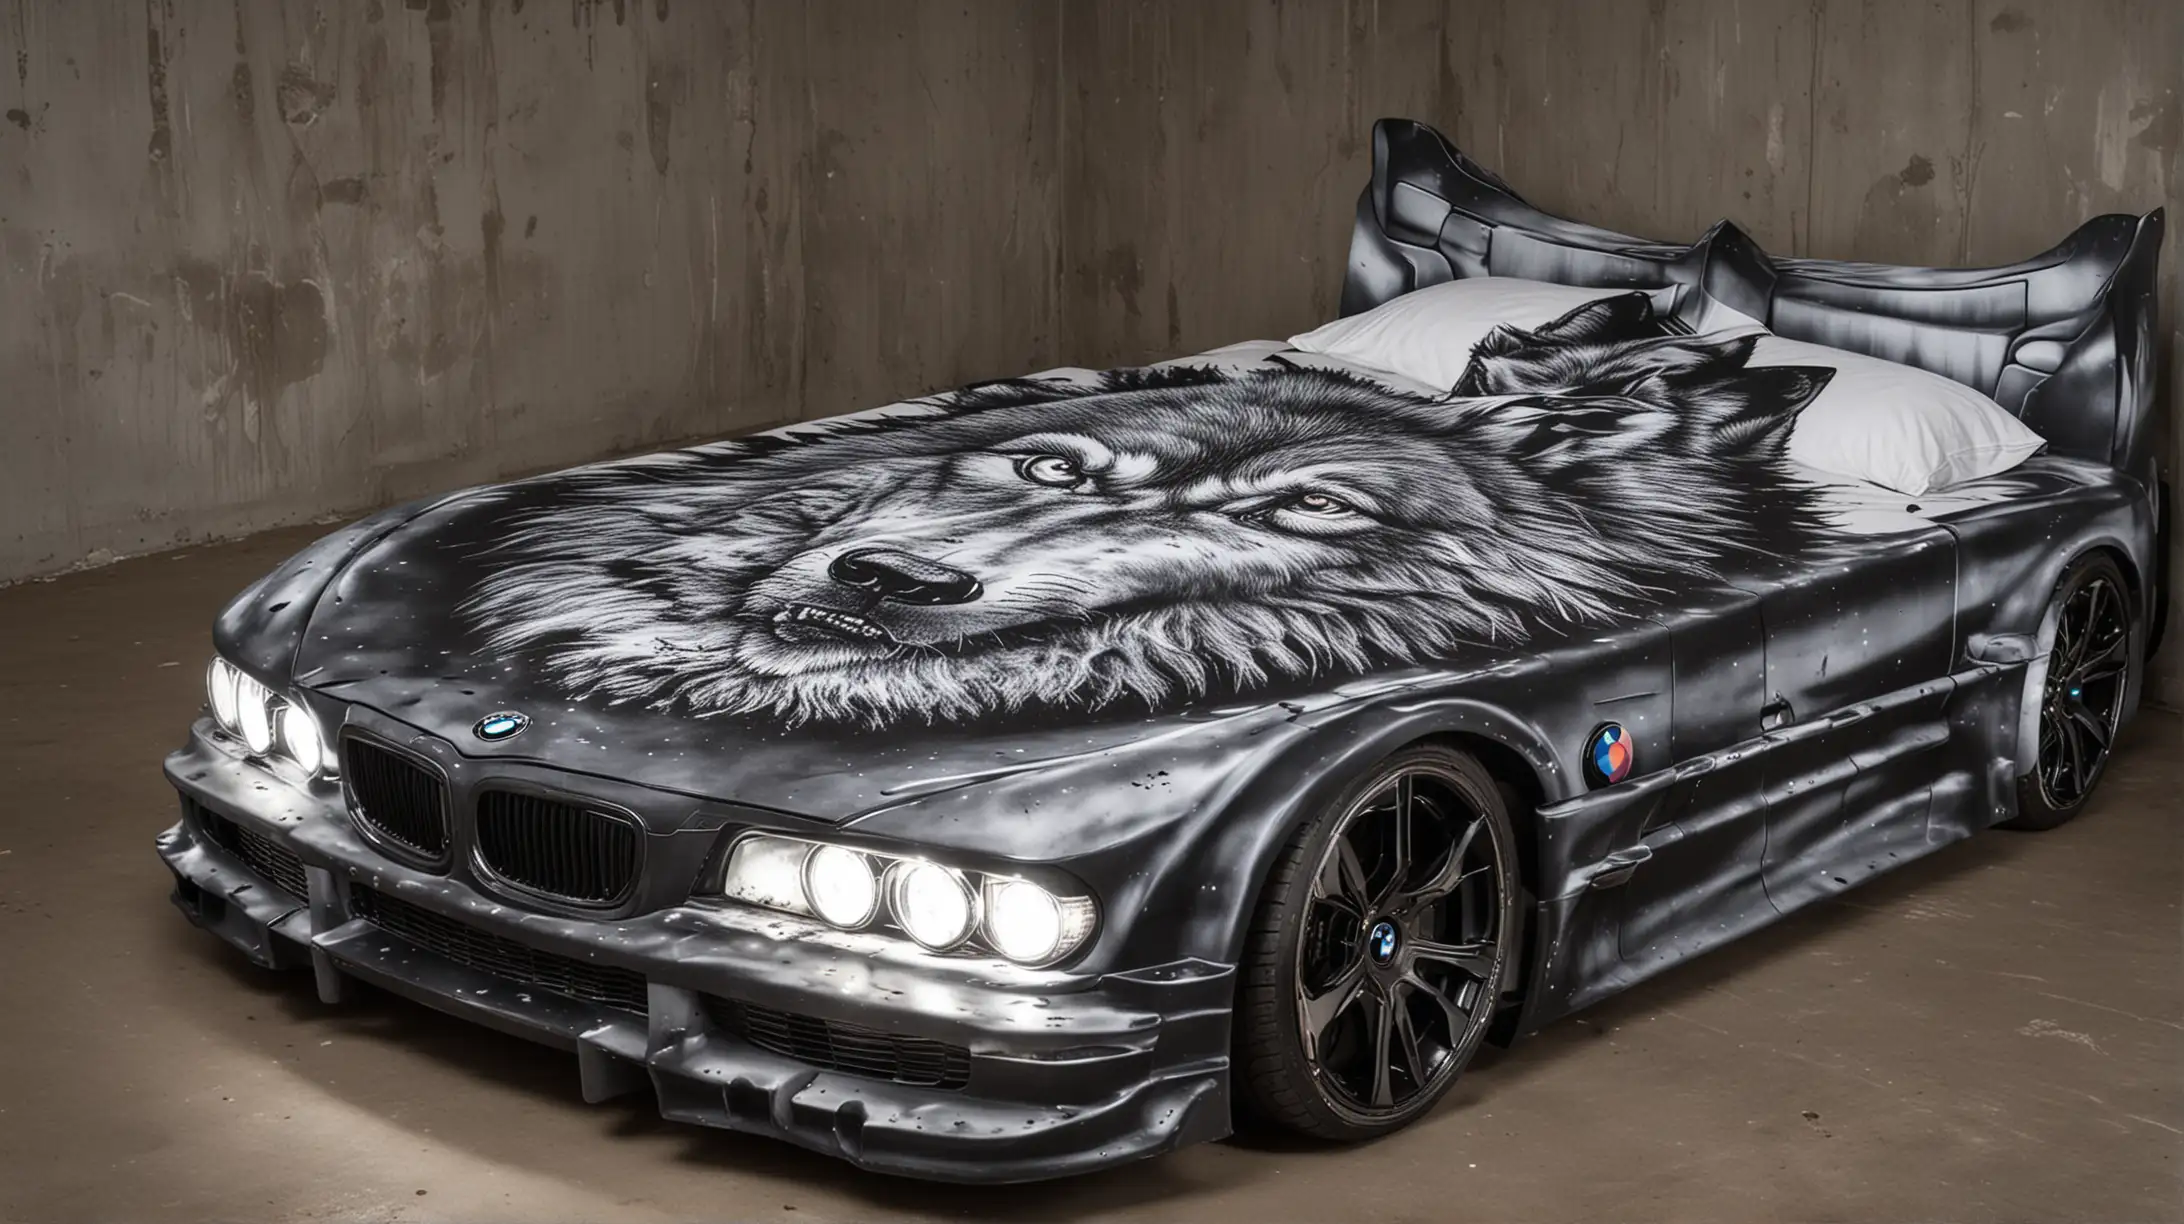 Luxury Double Bed Shaped like BMW Car with Evil Wolf Graffiti